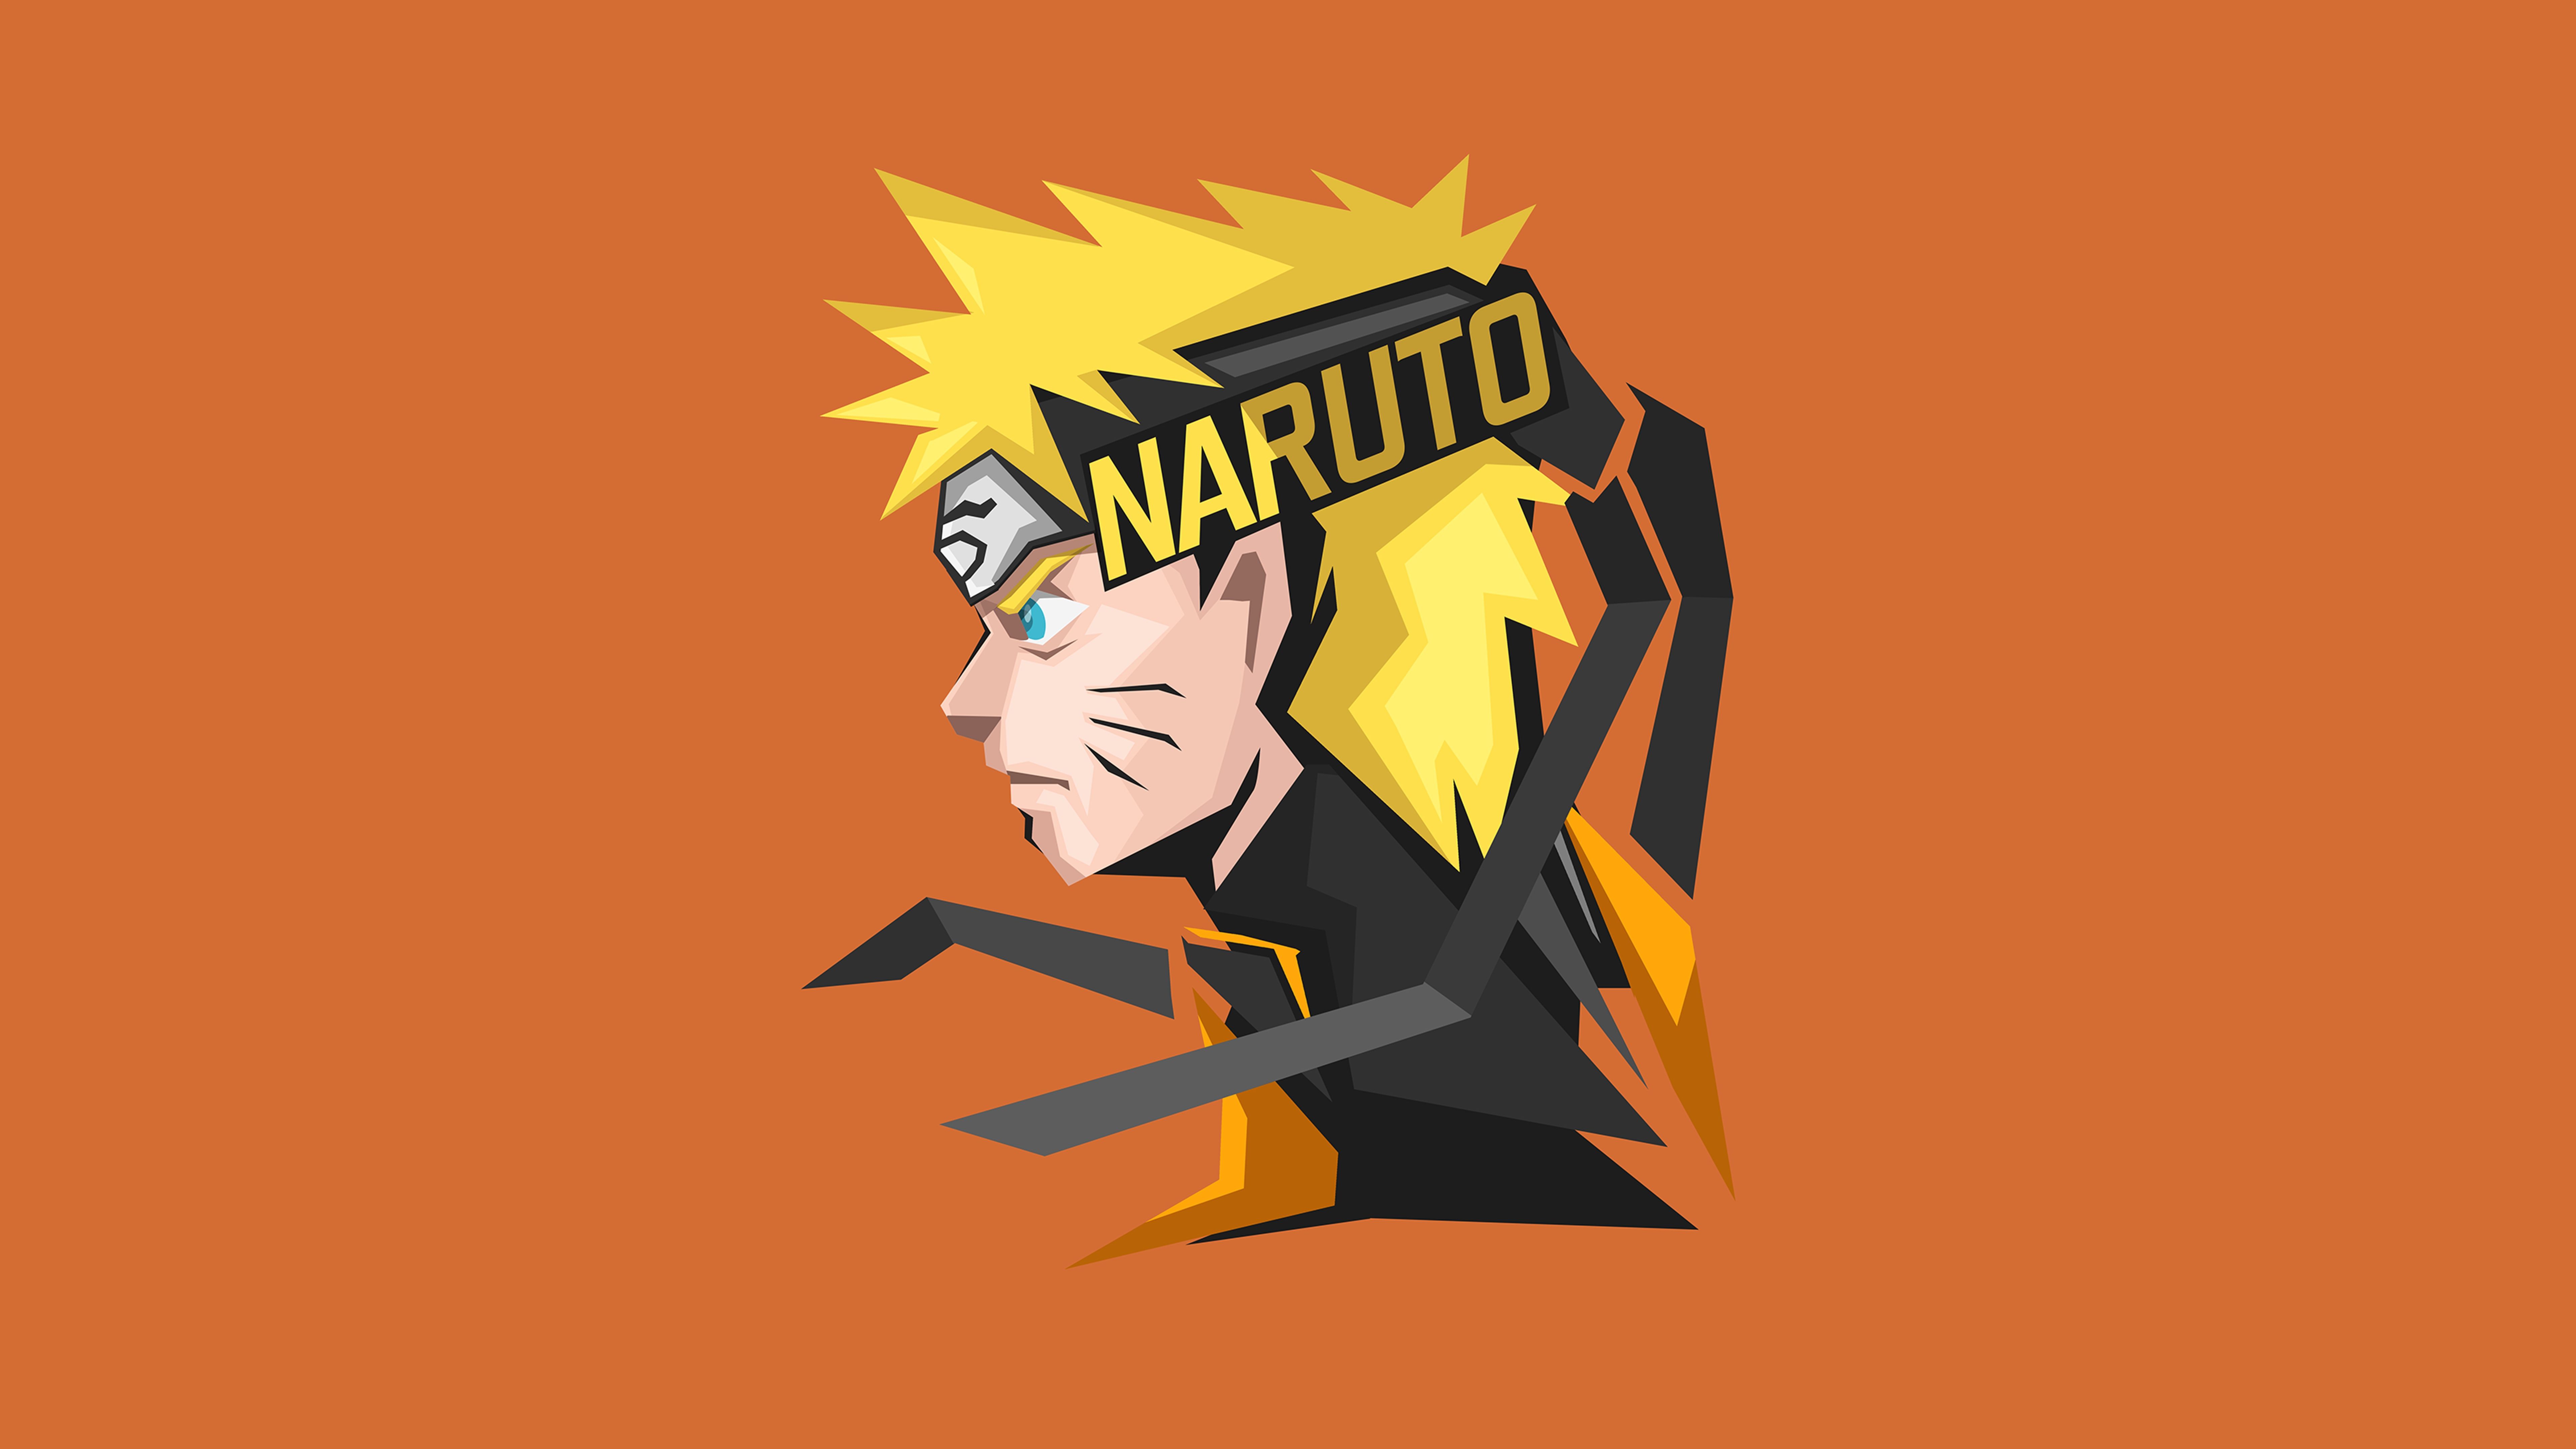 Trends For Ultra HD Naruto Wallpaper 4k Phone picture. Naruto wallpaper, HD anime wallpaper, Naruto